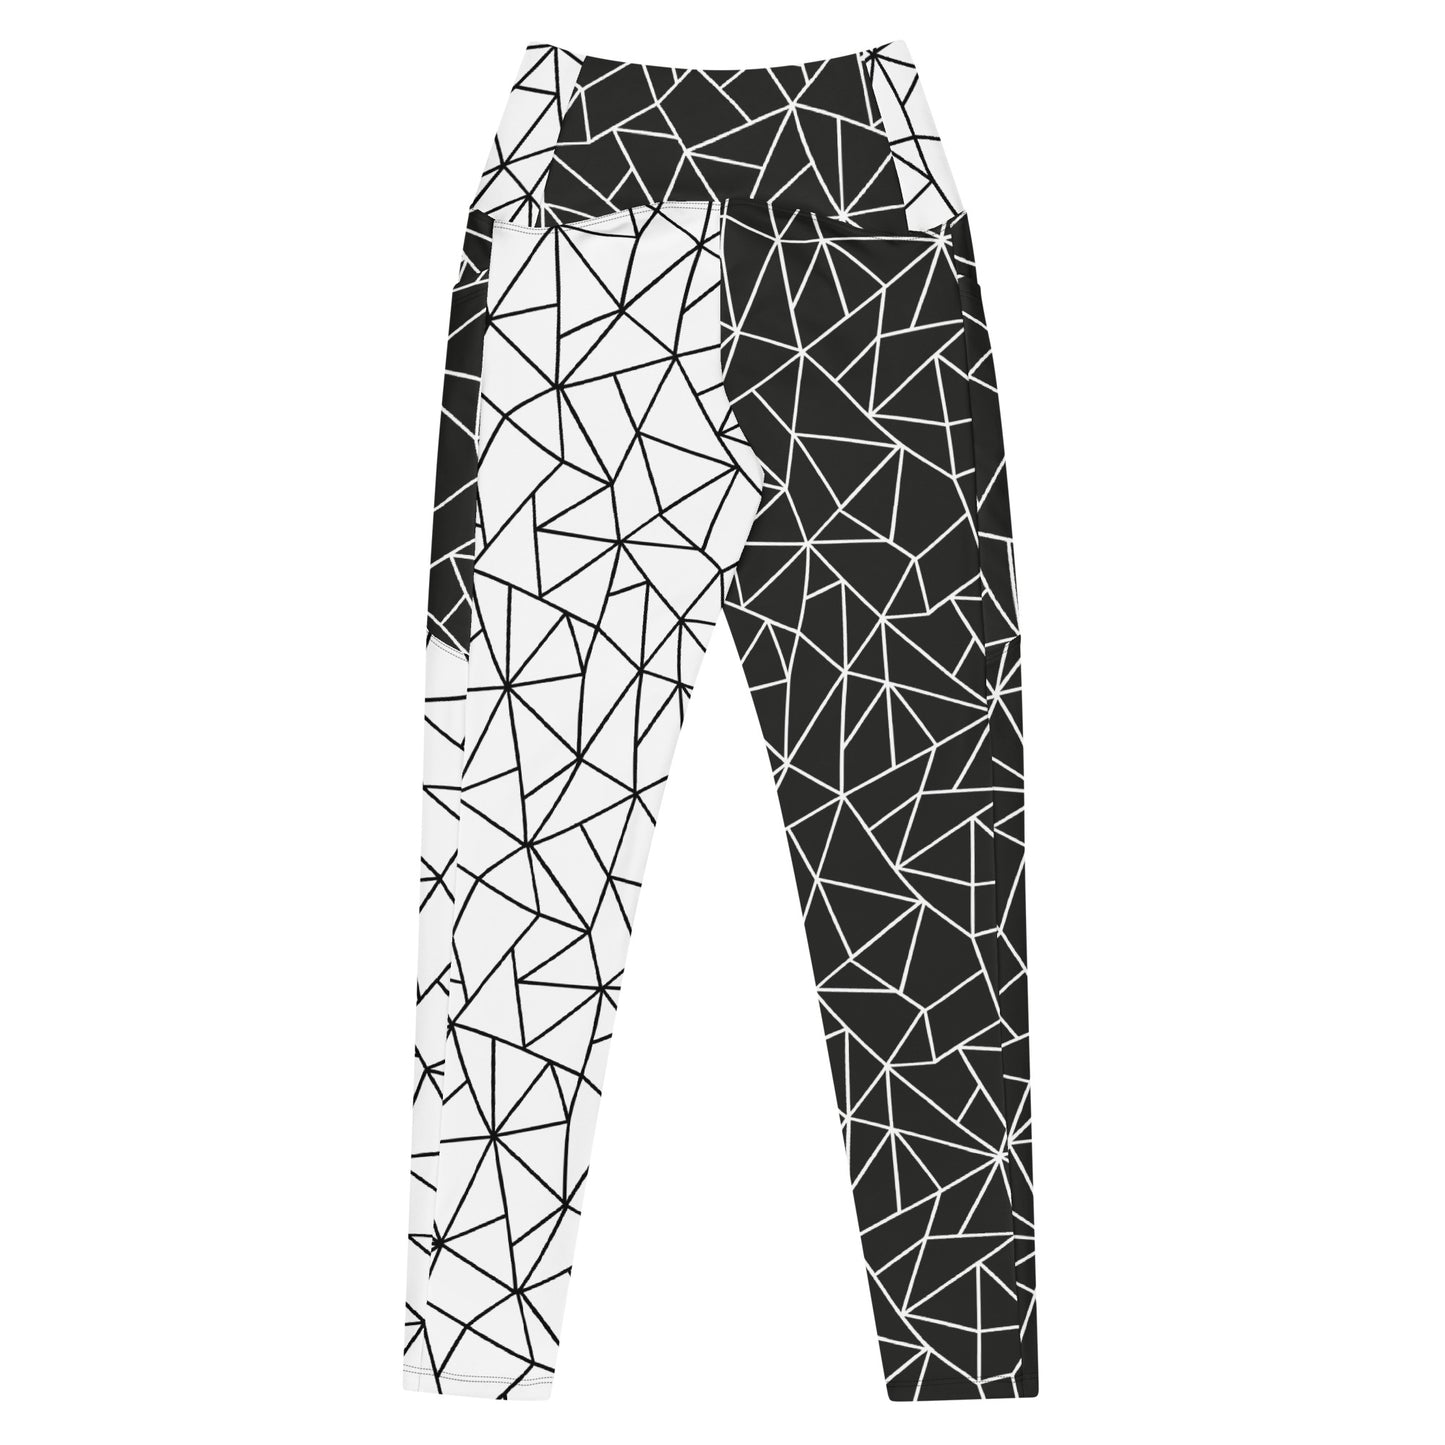 Angular Allure Women's Double Color Leggings With Pockets